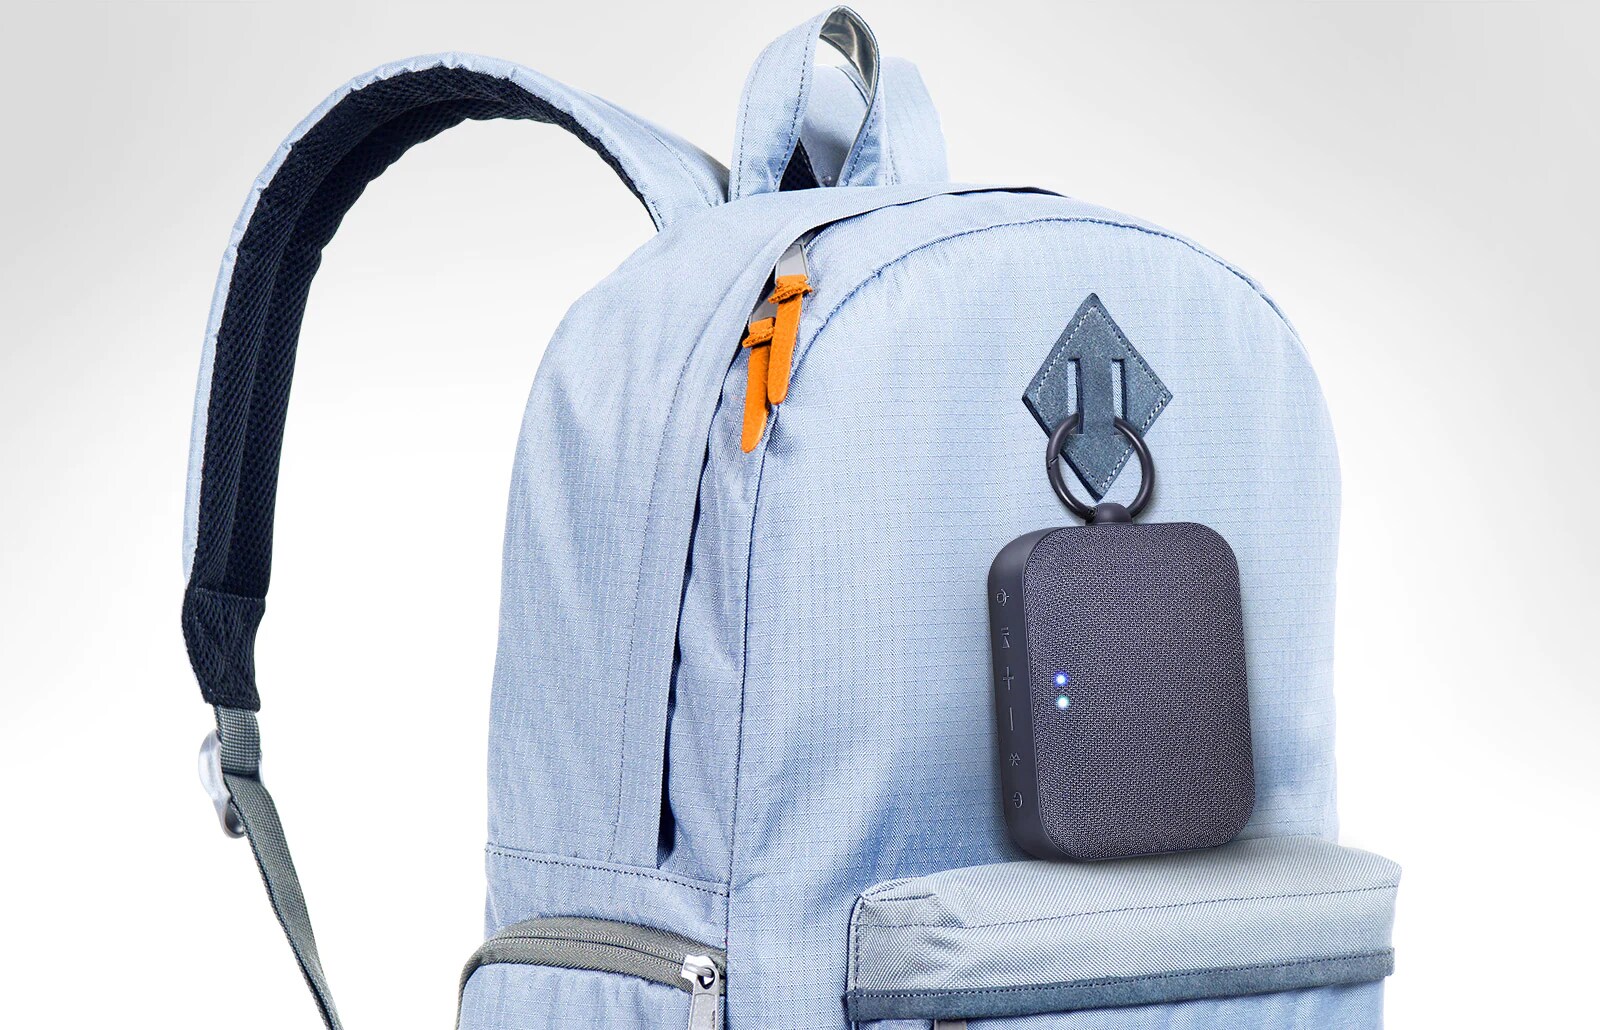 The LG XBOOM Go PN1 is enclosed in a sky blue backpack.